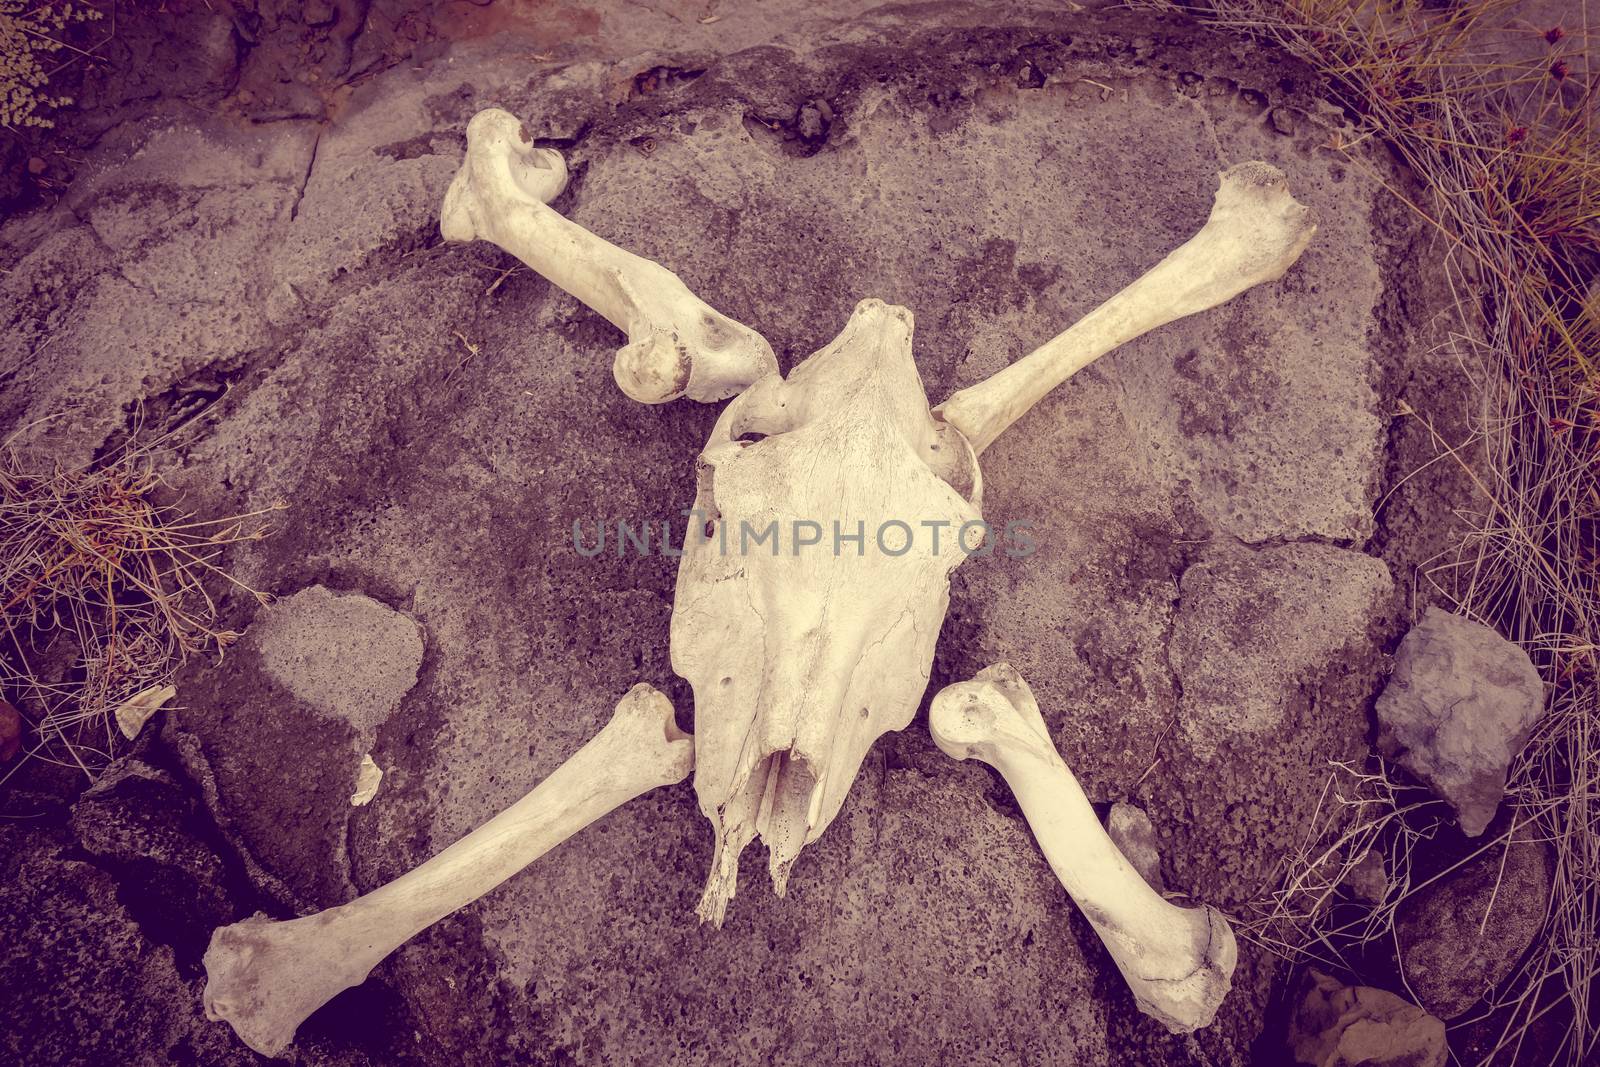 Horse skull and bones by daboost